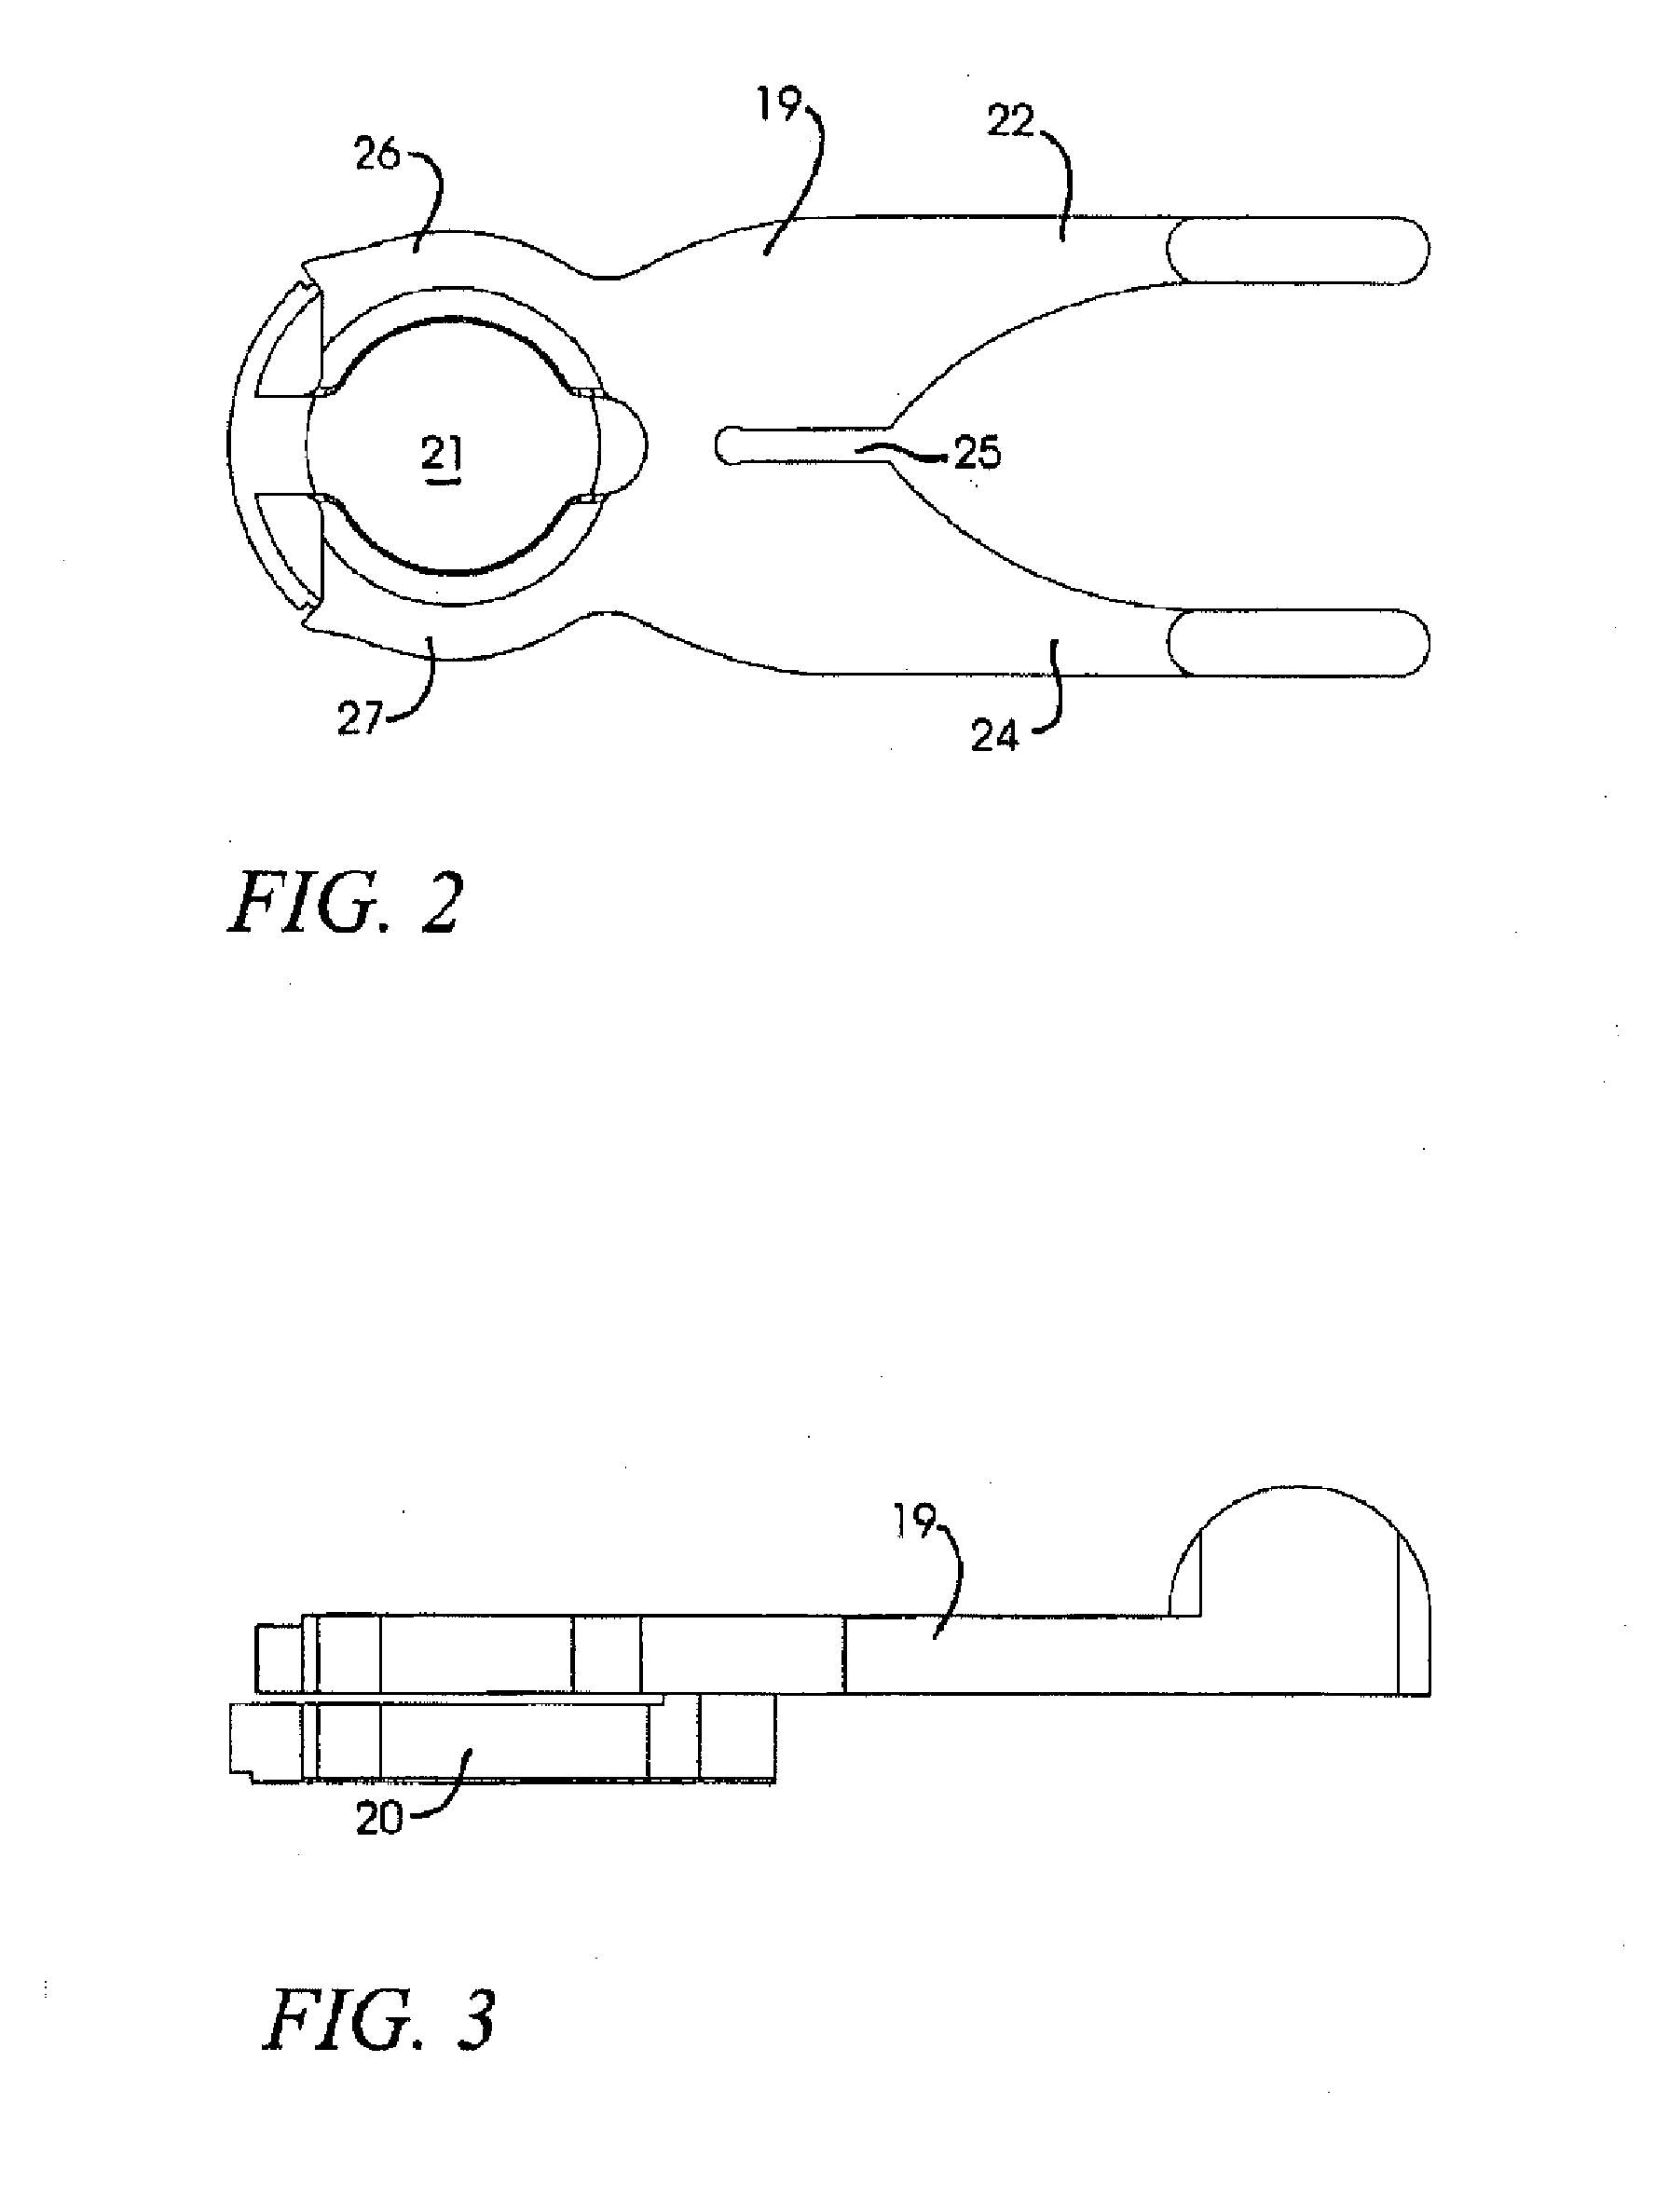 Hybrid ophthalmic interface apparatus and method of interfacing a surgical laser with an eye